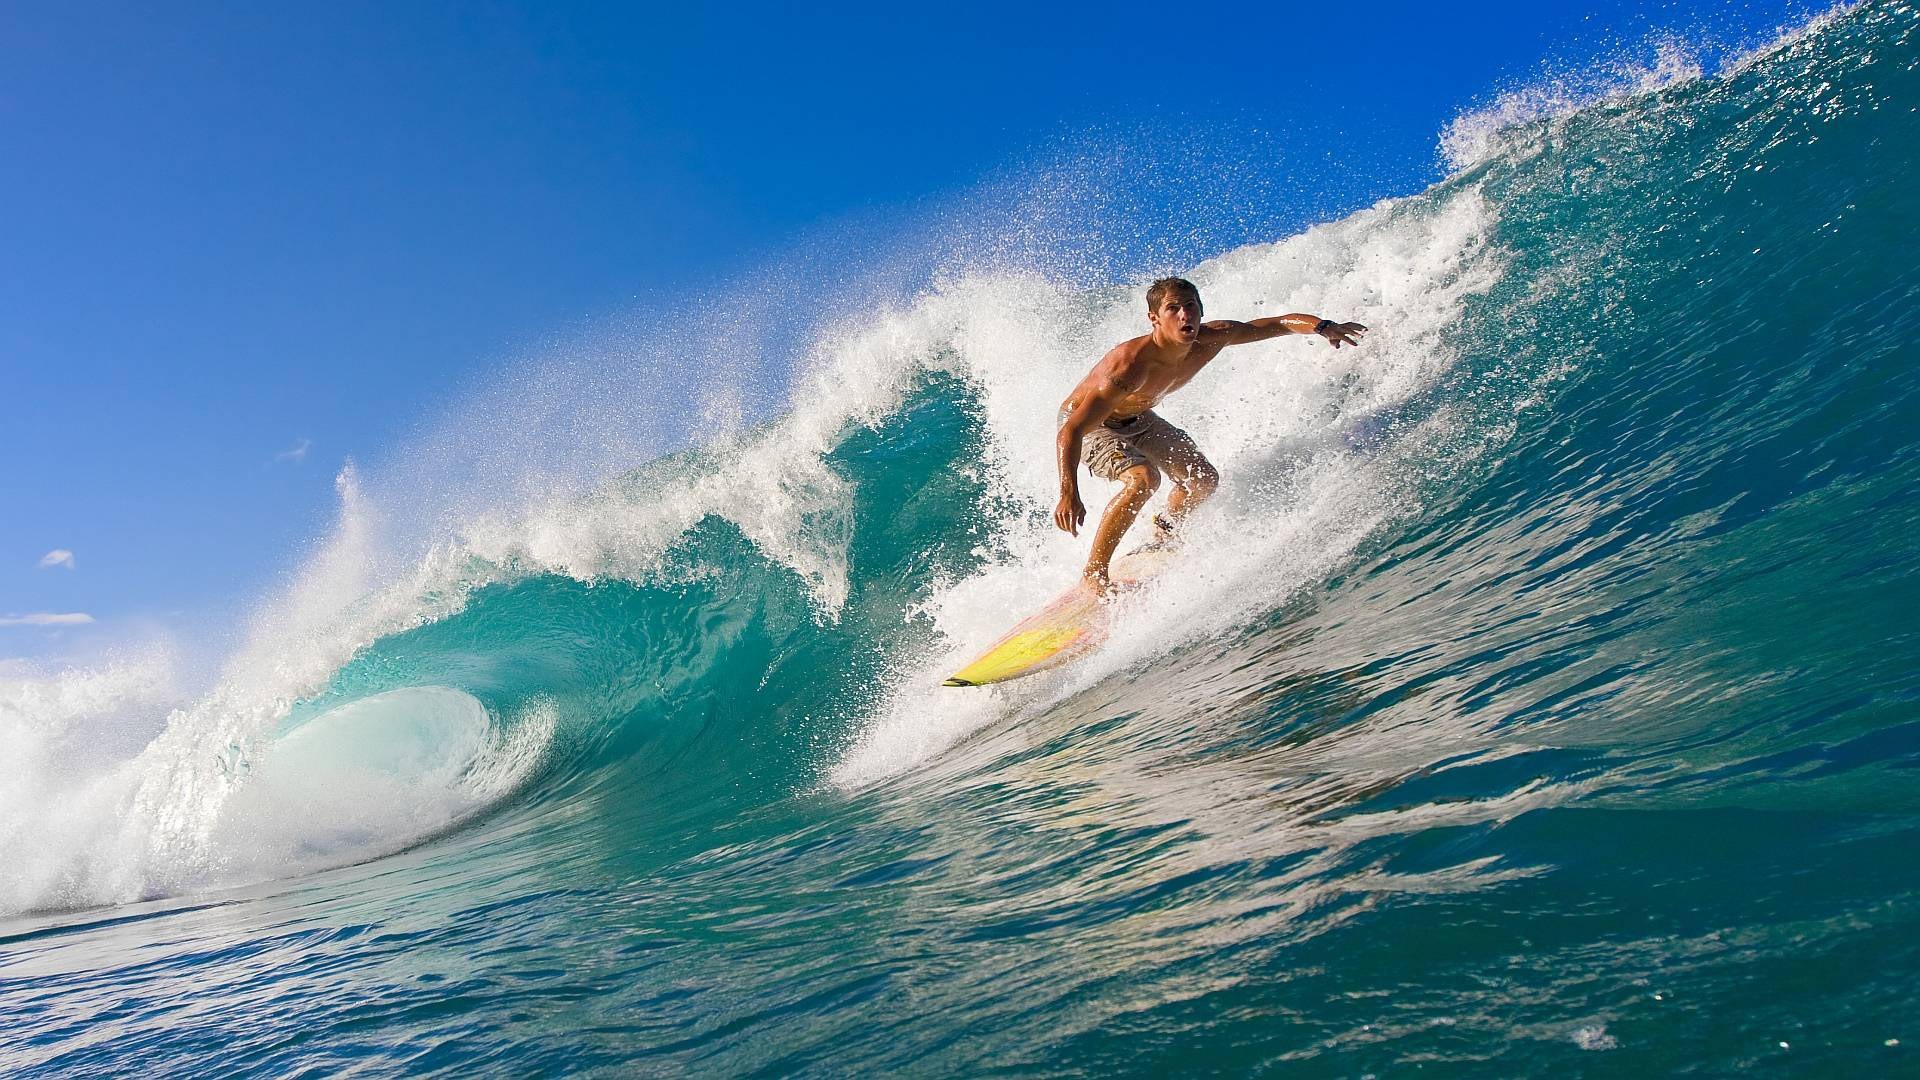 Surfing pictures desktop – surfing category